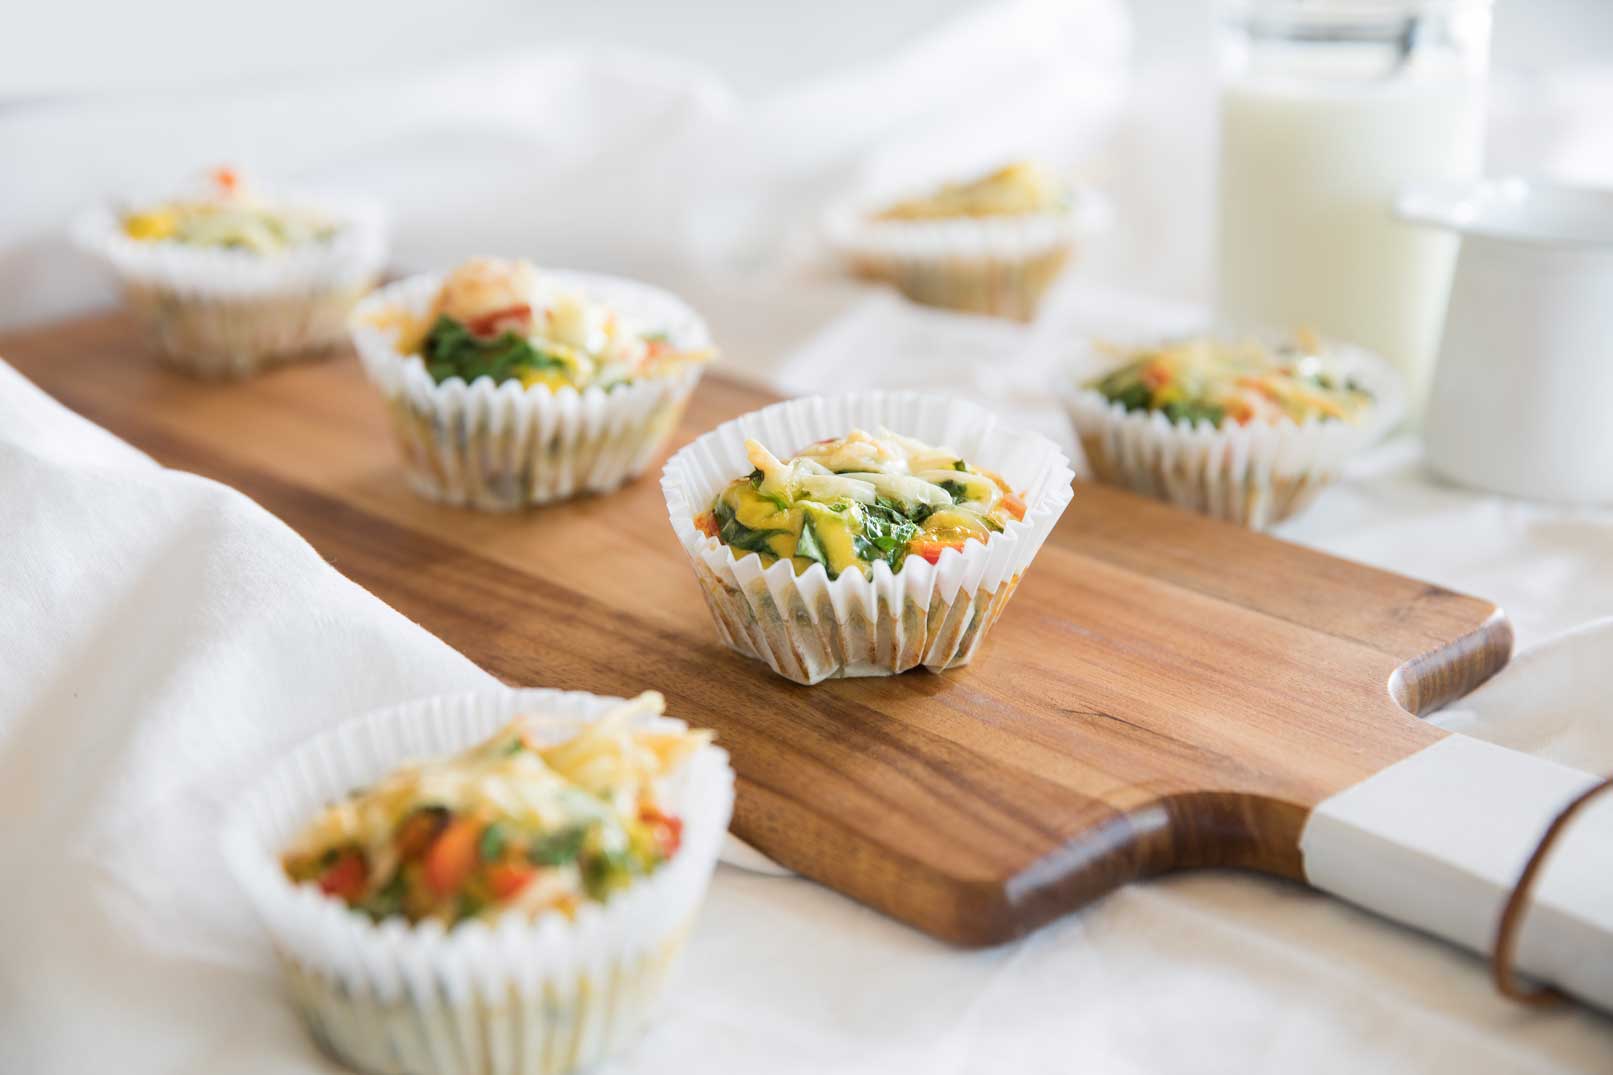 Egg muffins on a timber board